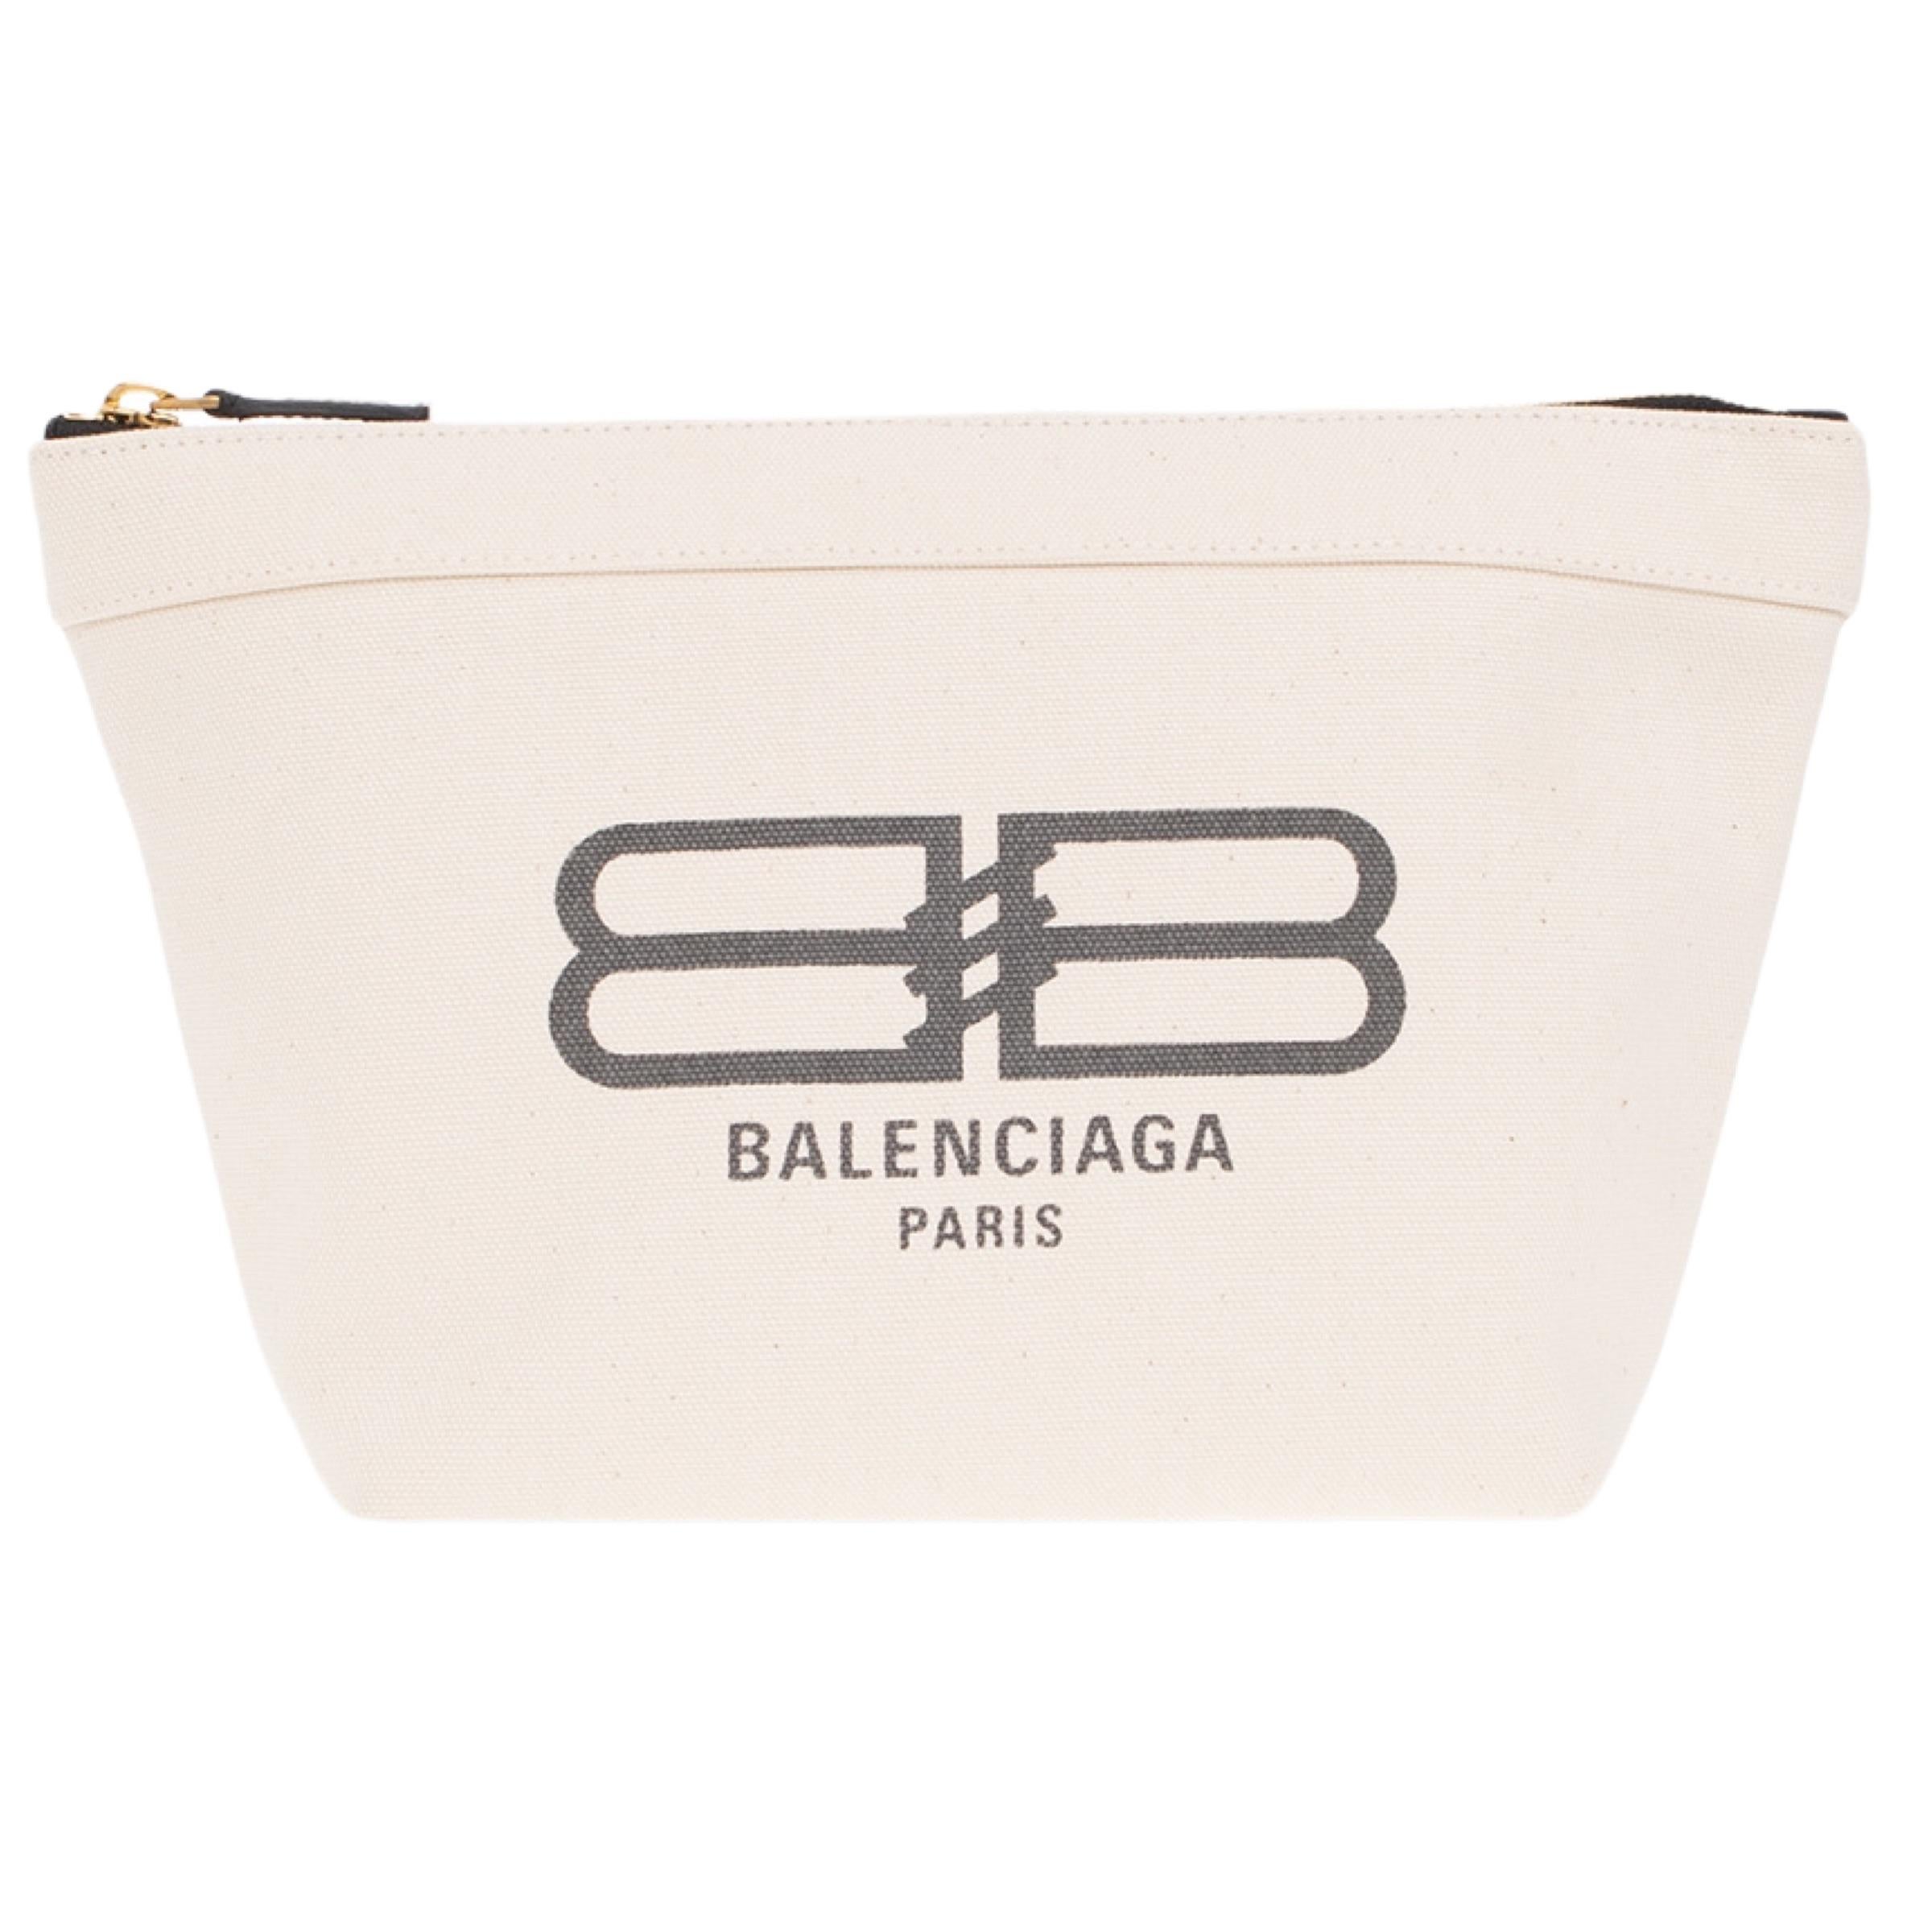 New Balenciaga White BB Logo Print Small Jumbo Canvas Clutch Pouch Bag

Authenticity Guaranteed

DETAILS
Brand: Balenciaga
Condition: Brand new
Gender: Unisex
Category: Pouch
Color: White 
Material: Canvas
Front logo print
Gold-tone hardware
Top zip